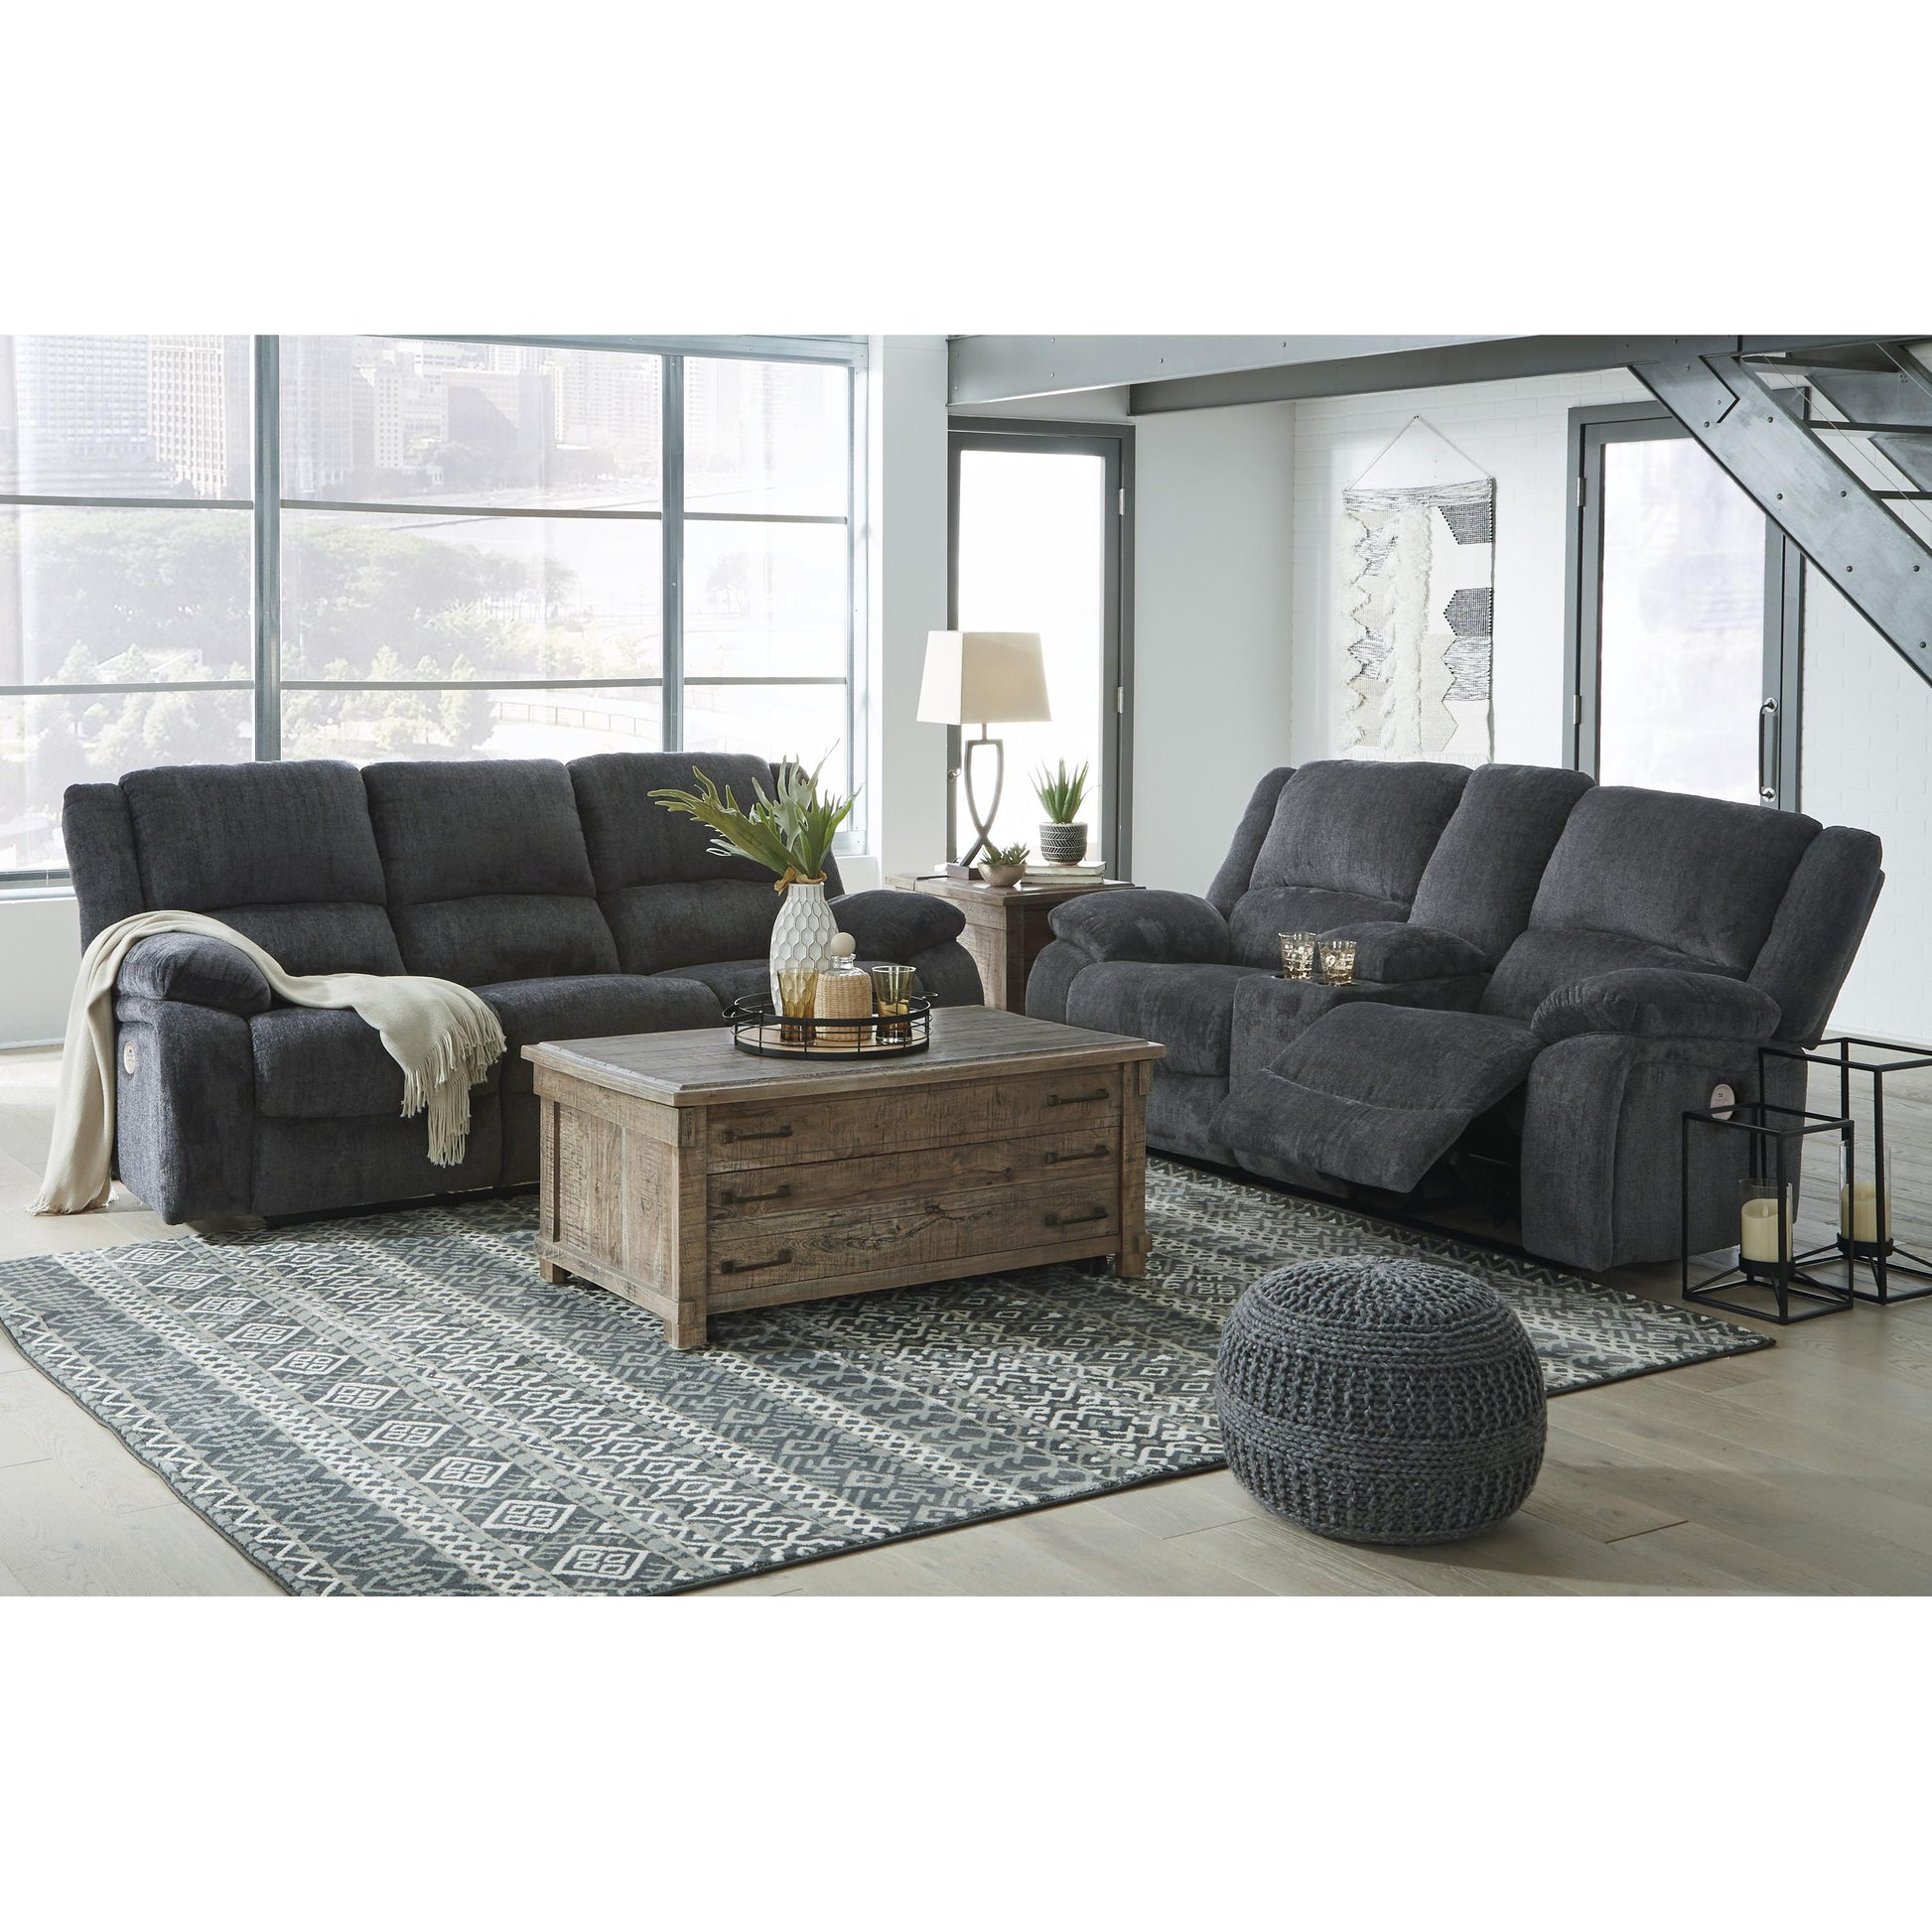 Signature Design by Ashley Draycoll Power Reclining Fabric Loveseat 7650496